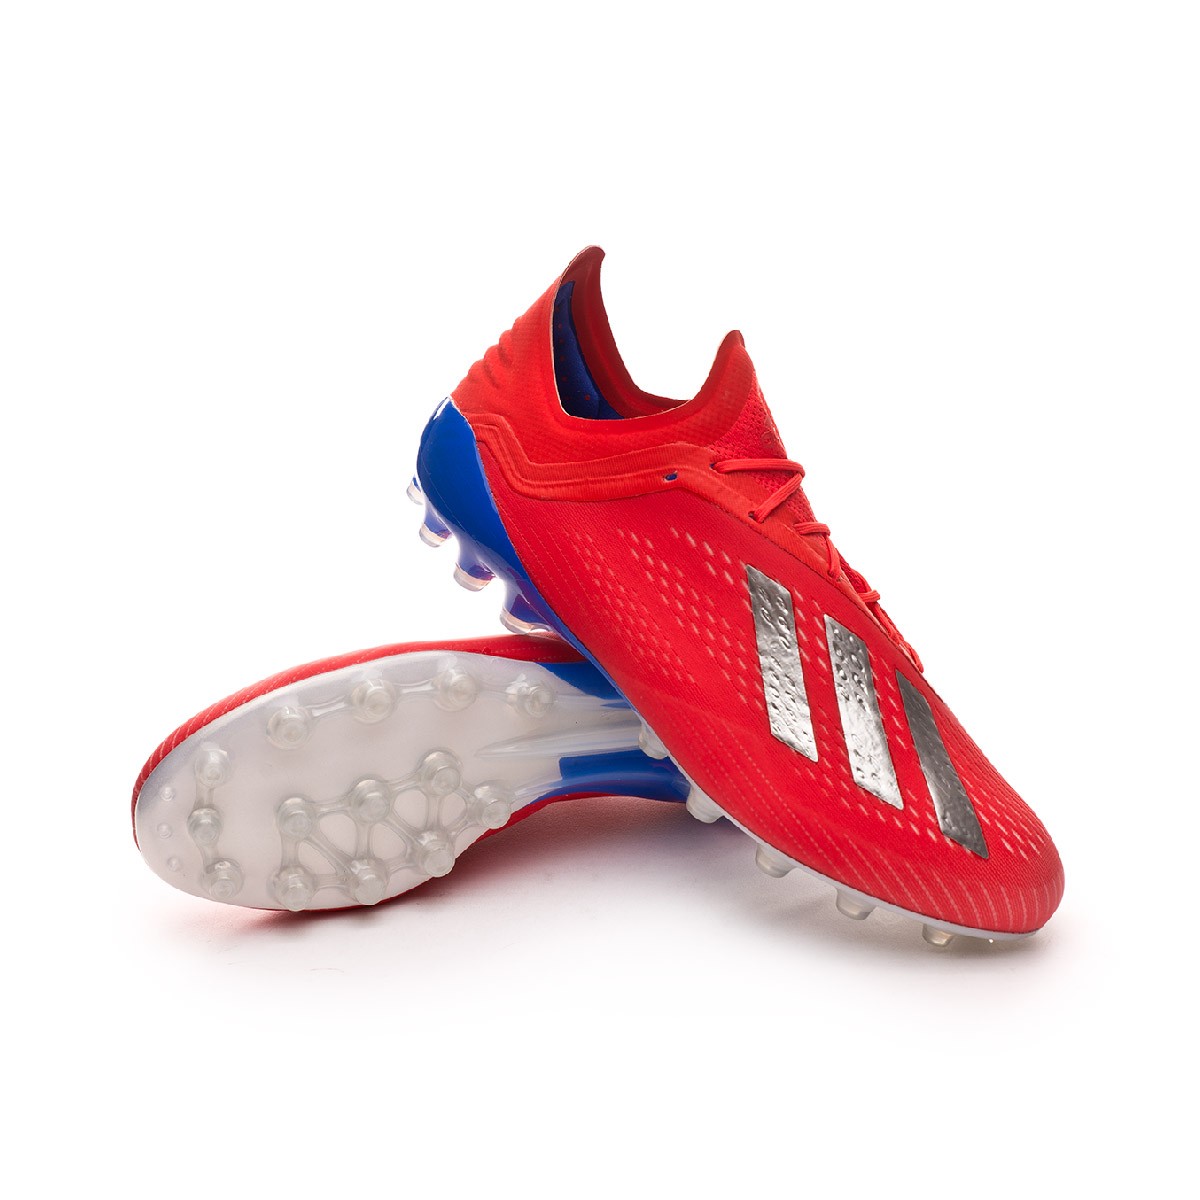 Football Boots adidas X 18.1 AG Active red-Silver metallic-Bold blue -  Football store Fútbol Emotion